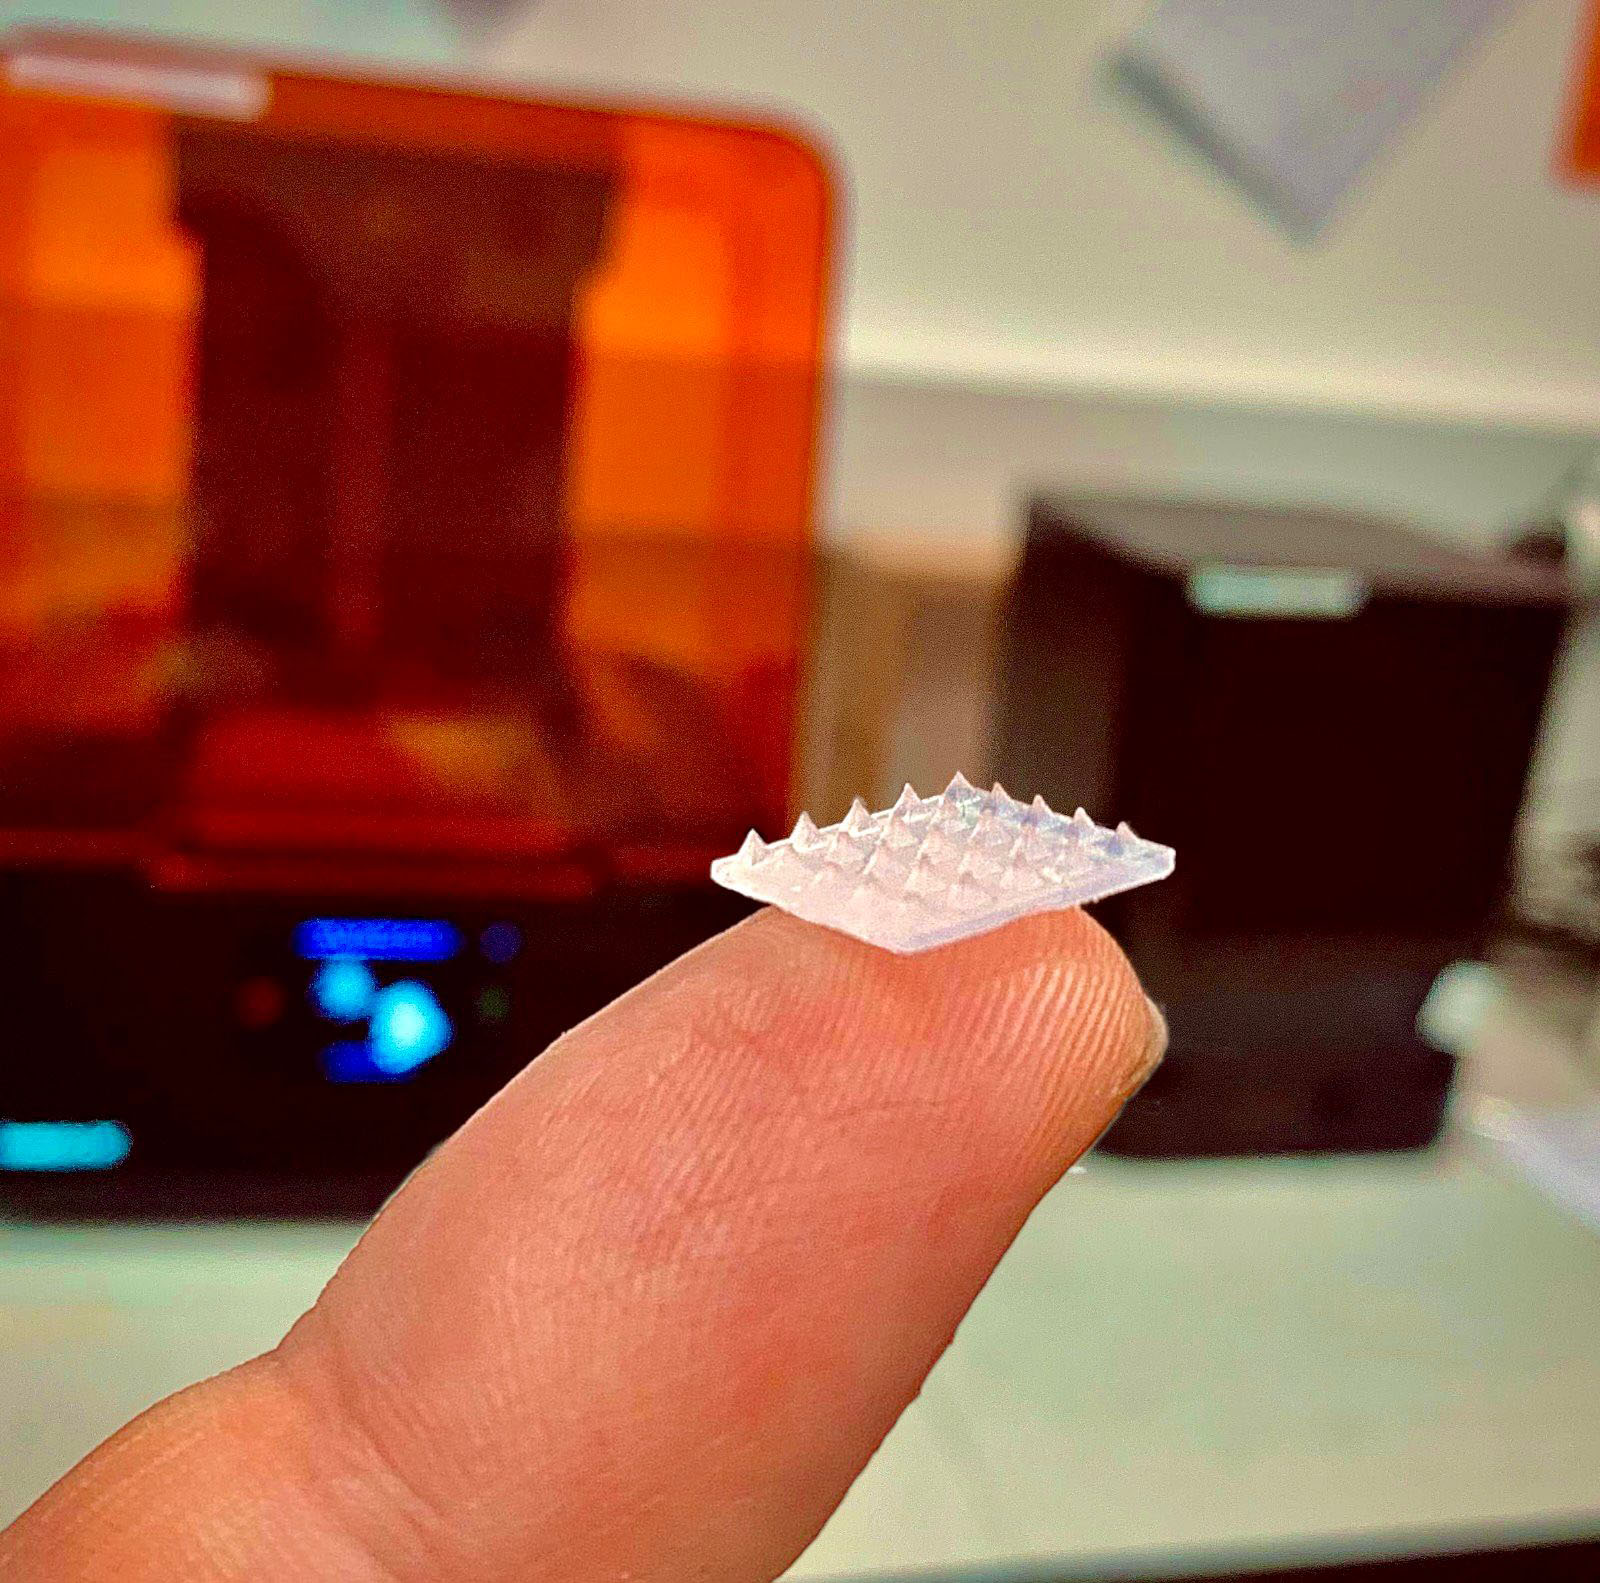 microneedle patch on the tip of a finger